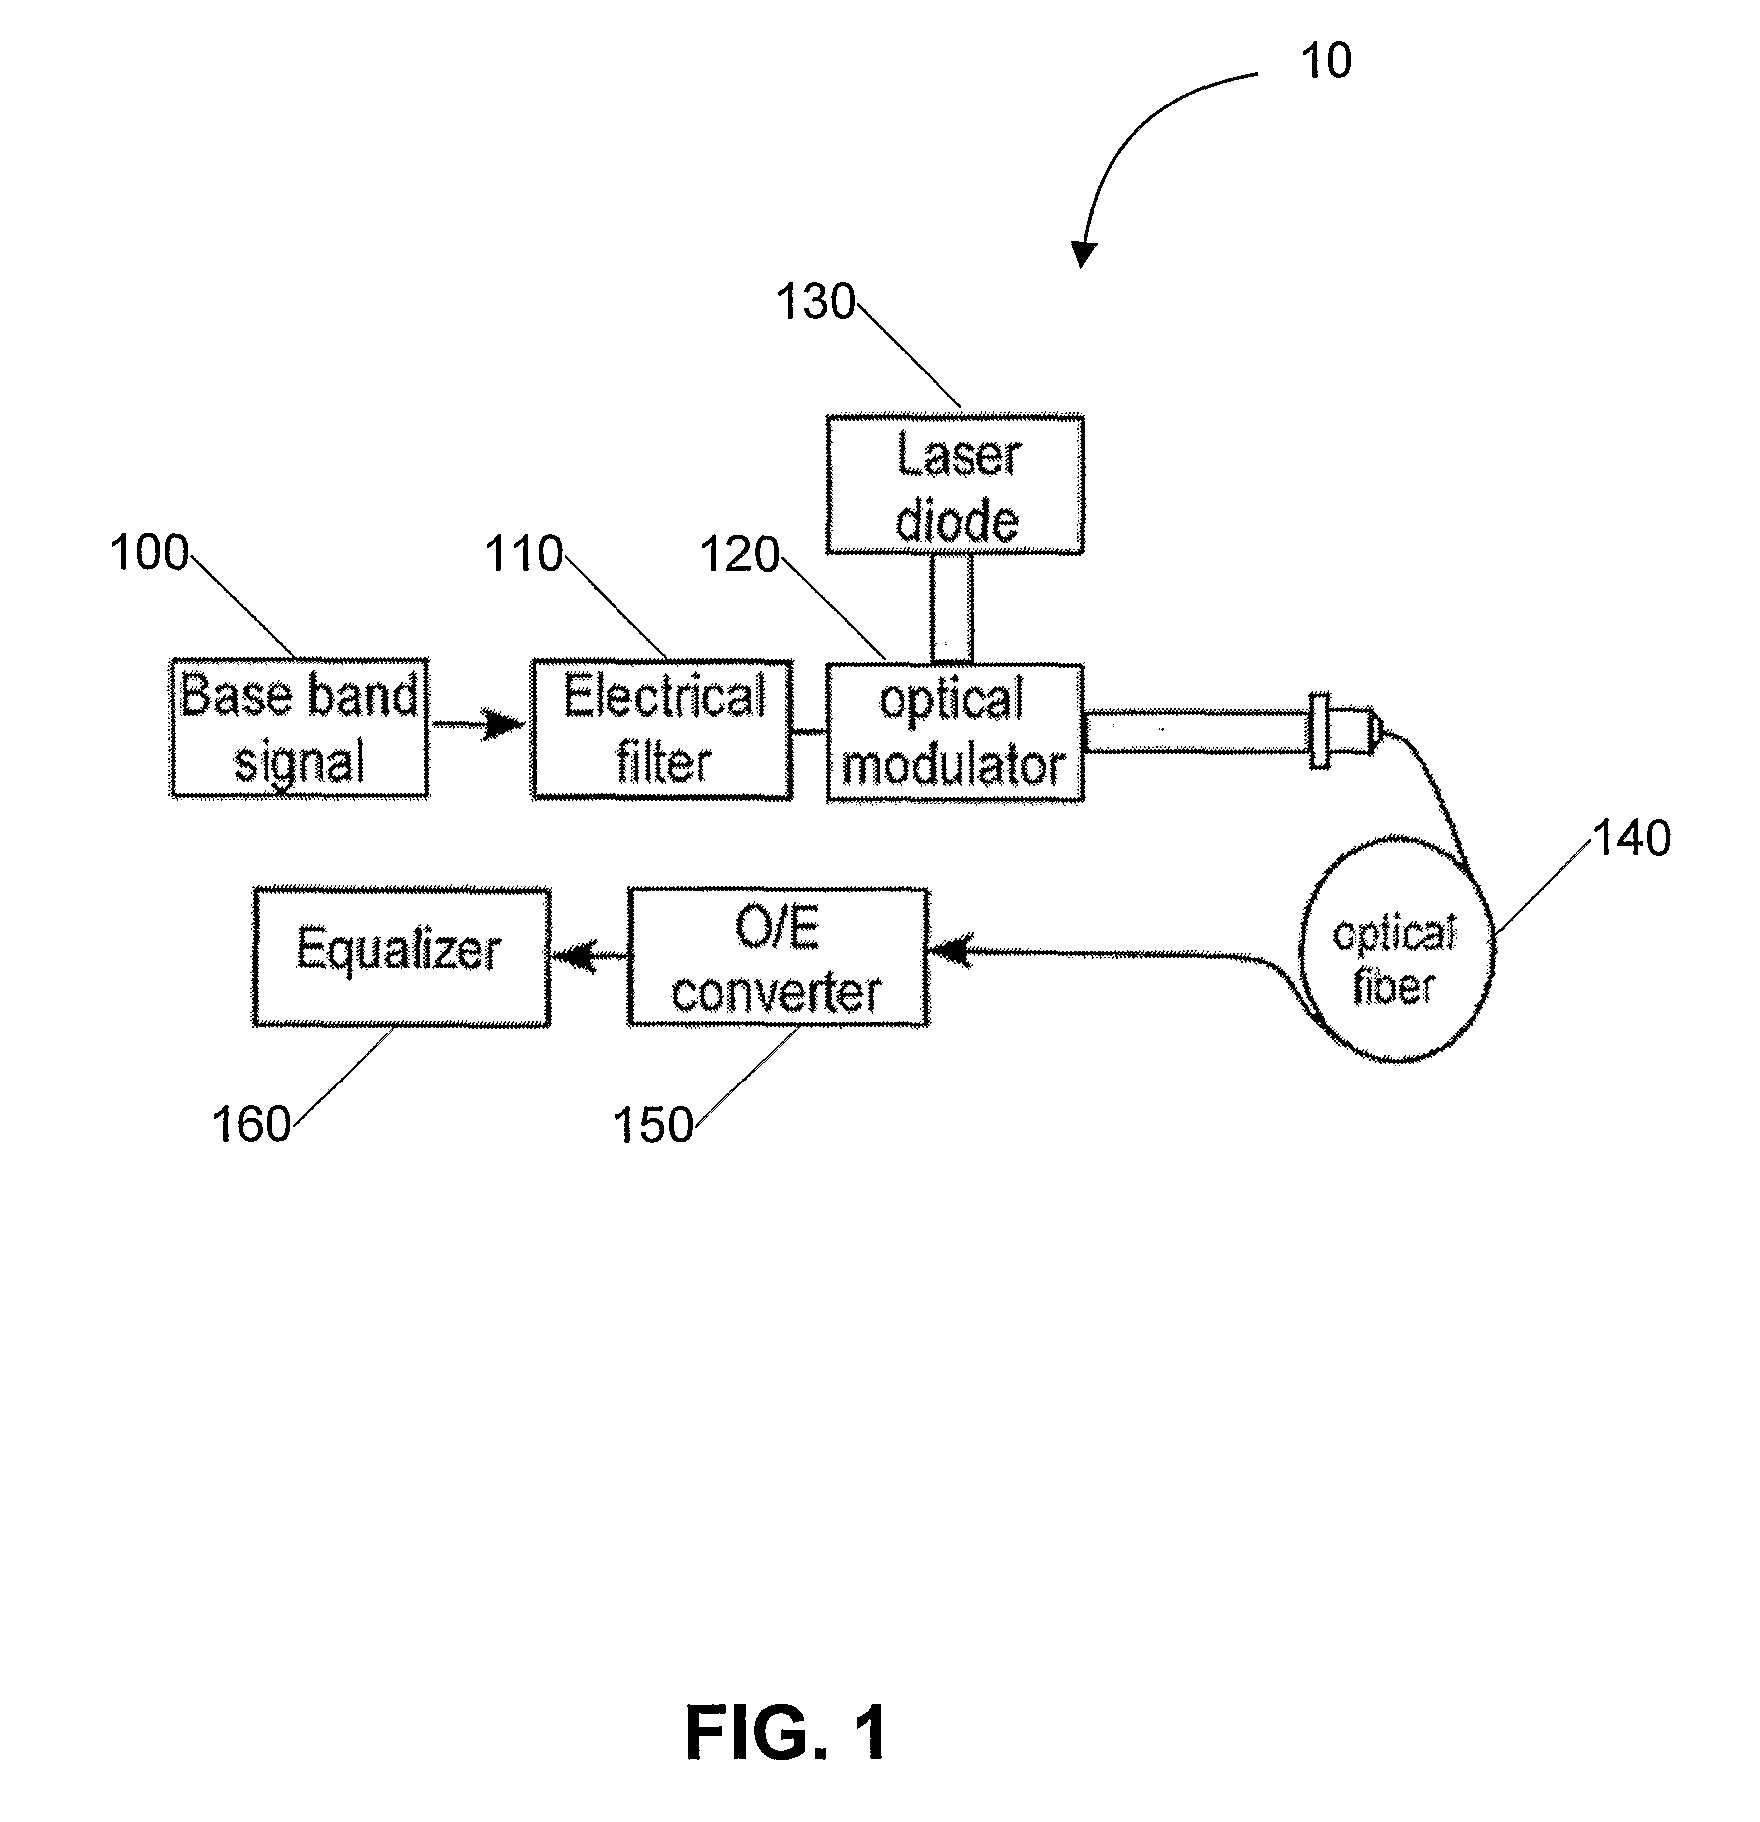 System and Method For Increasing Spectral Efficiency, Capacity and/or Dispersion-Limited Reach of Modulated Signals in Communication Links